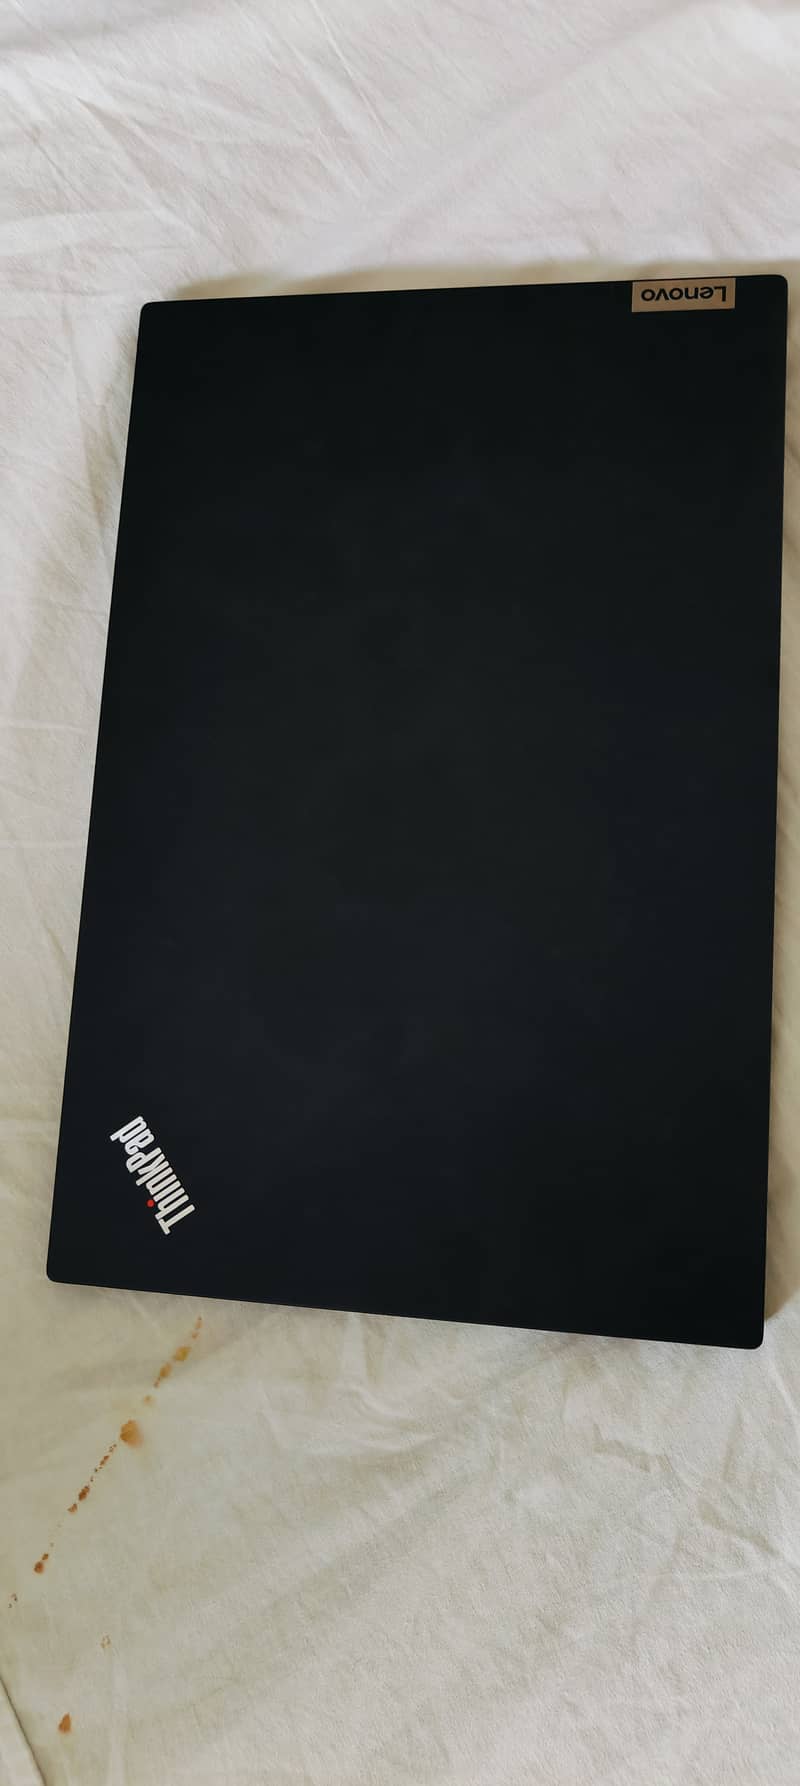 Laptop i7-12th Genration 8/512GB used new condition 10/10 2